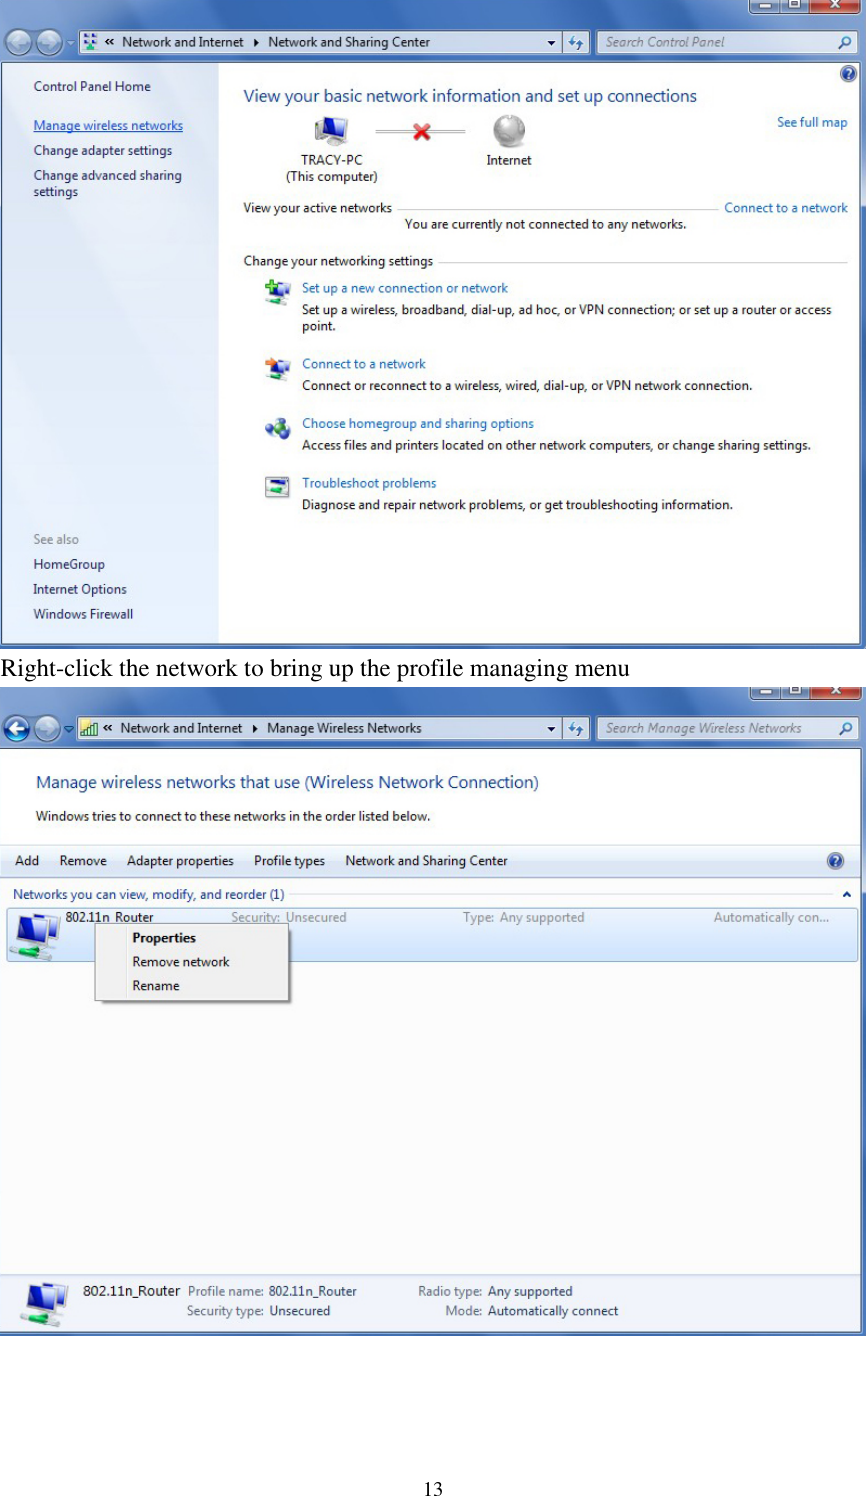 13Right-click the network to bring up the profile managing menu